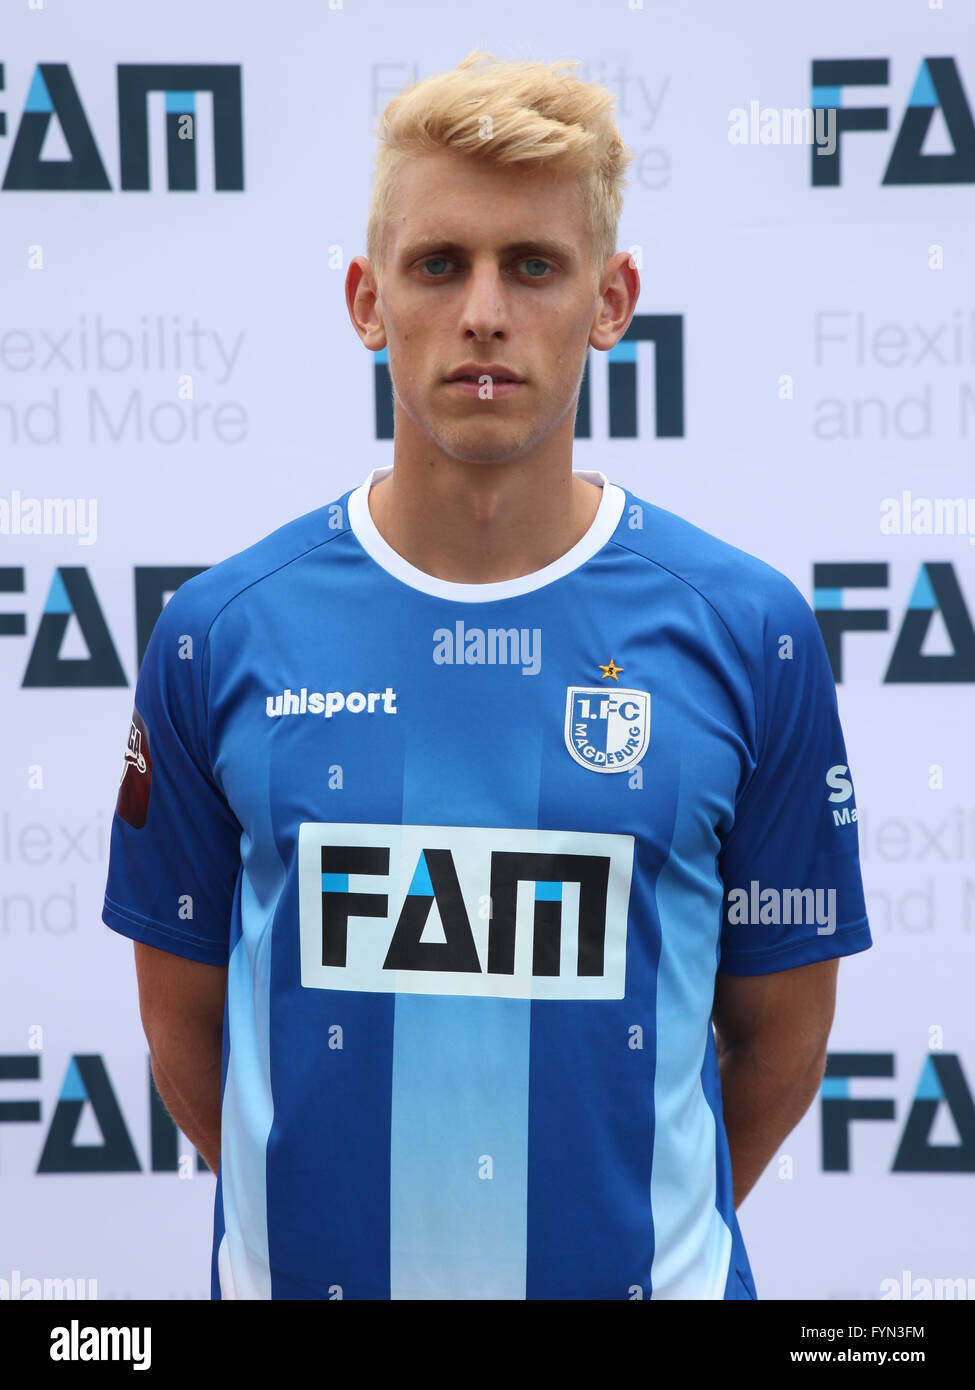 Torge Bremer (1.FC Magdeburg) Stock Photo